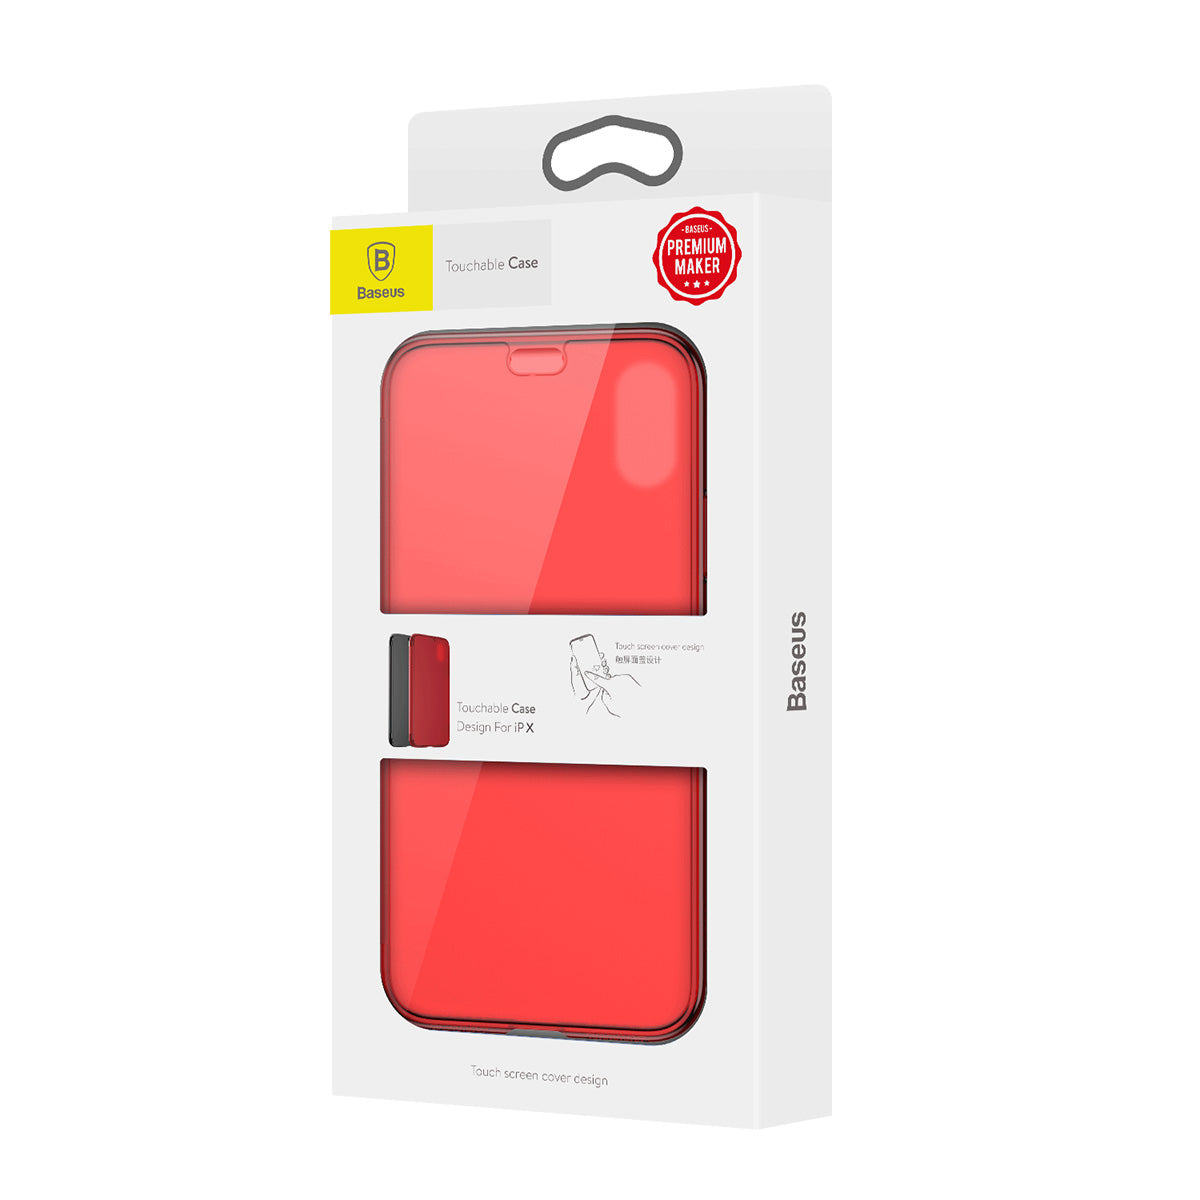 iPhone-X-Baseus-Touchable-Case-Red-Packaging_RZL0Y3RUC8SK.jpg